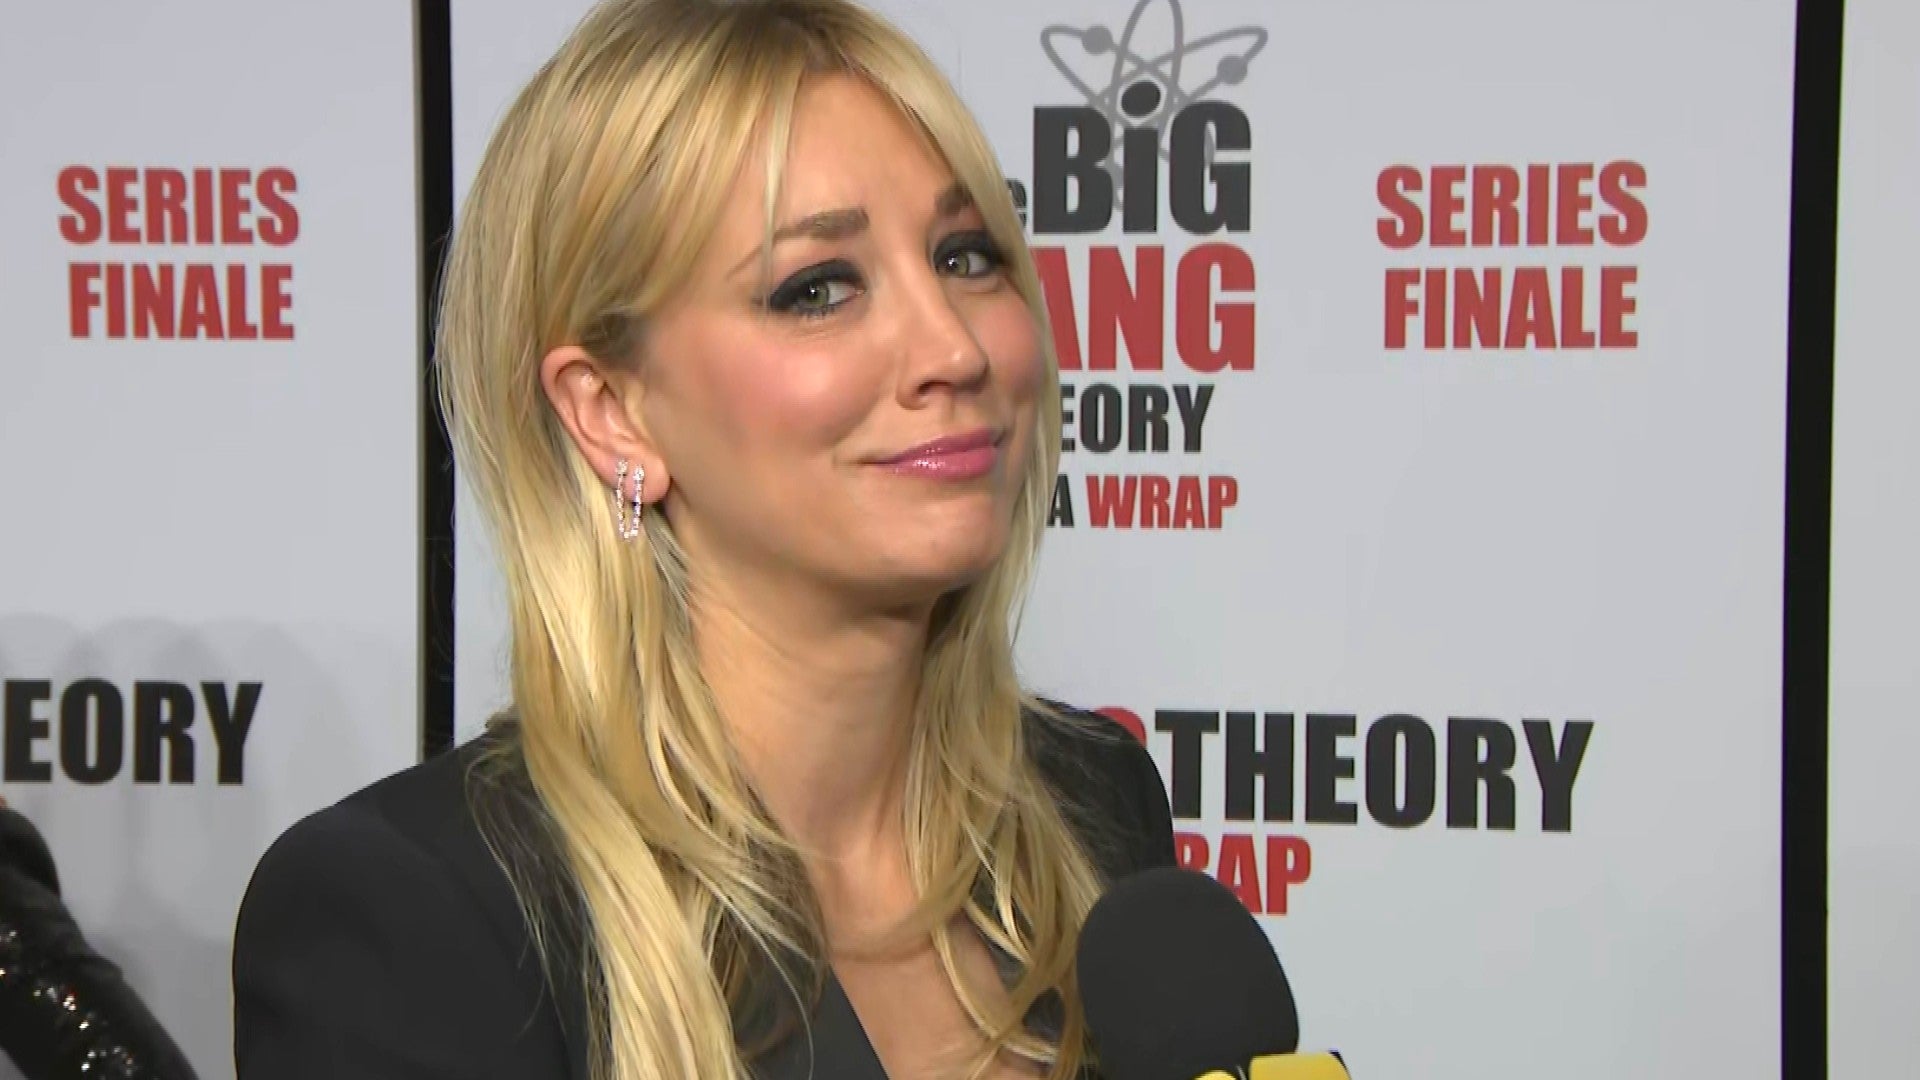 Kaley Cuoco Porn Captions - https://www.etonline.com/media/videos/anne-hathaway-admits-she-never-thought-things-would-be-going-this-well-in-her-career  2019-04-30T17:00:56-07:00  https://www.etonline.com/sites/default/files/images/2019-04/eto_c09_the_hustle_043019.jpg  Anne ...